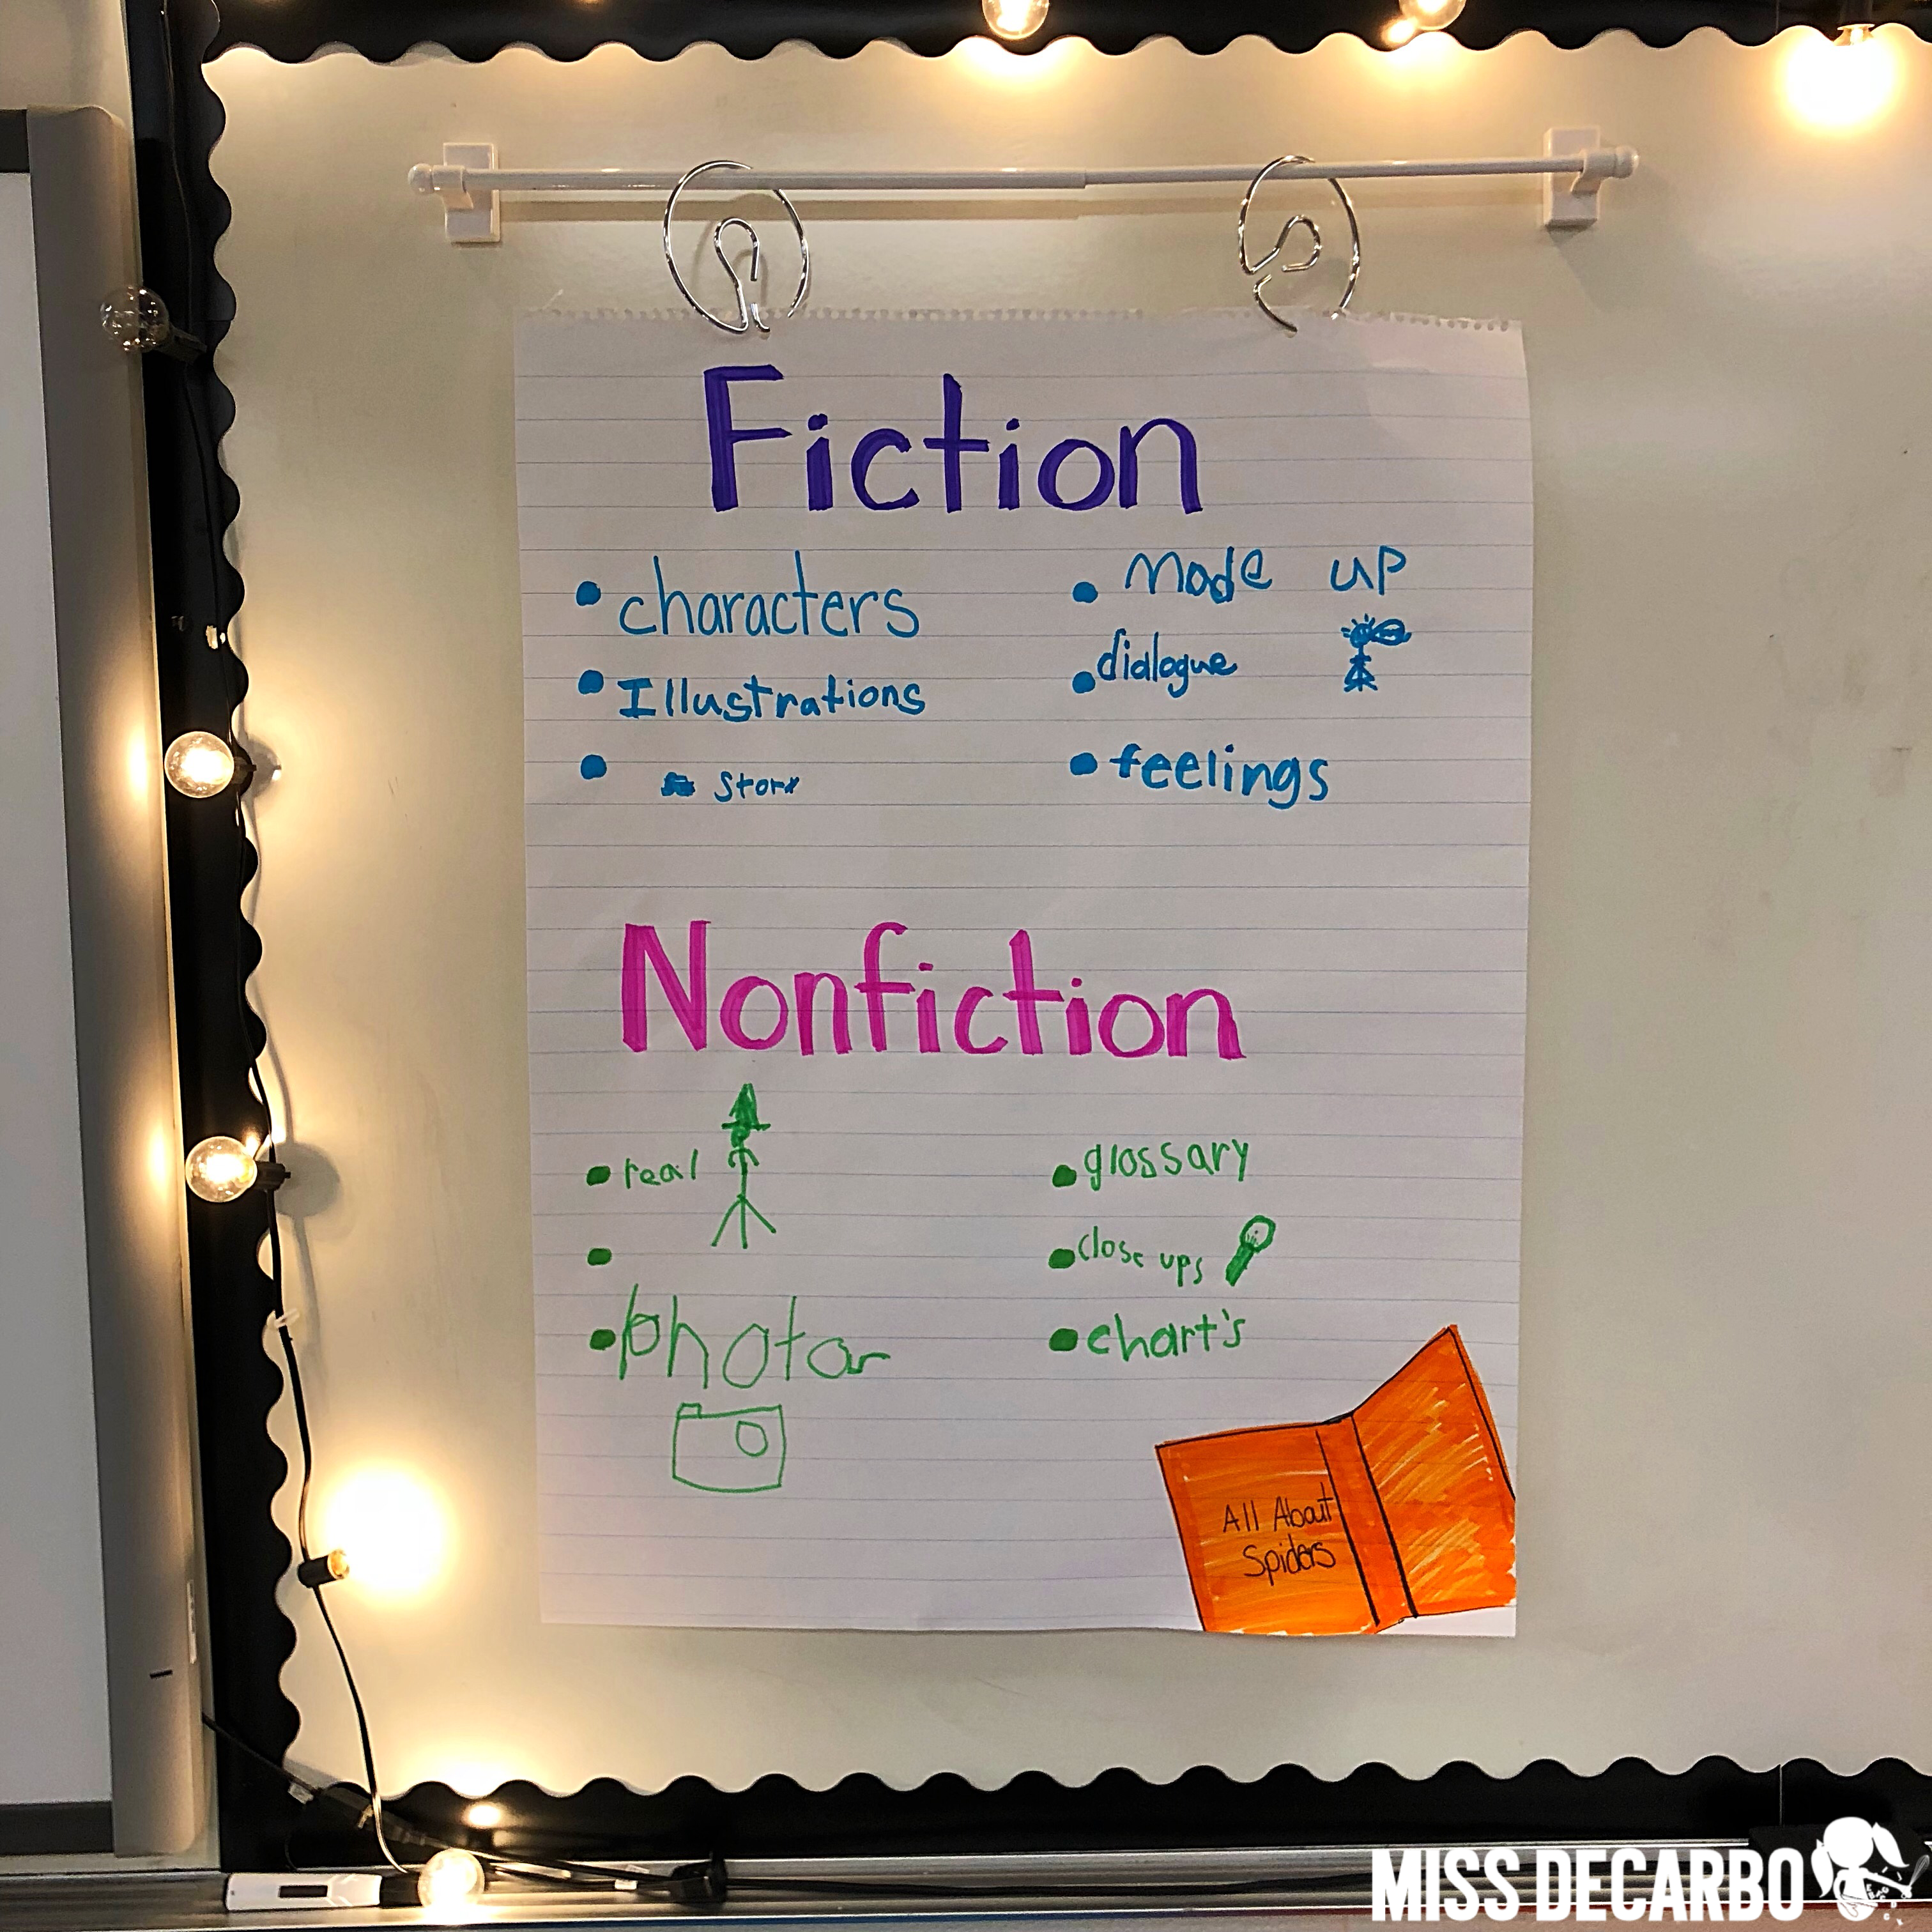 Fiction and Nonfiction Mini Lessons - Miss DeCarbo Within Fiction Vs Nonfiction Worksheet